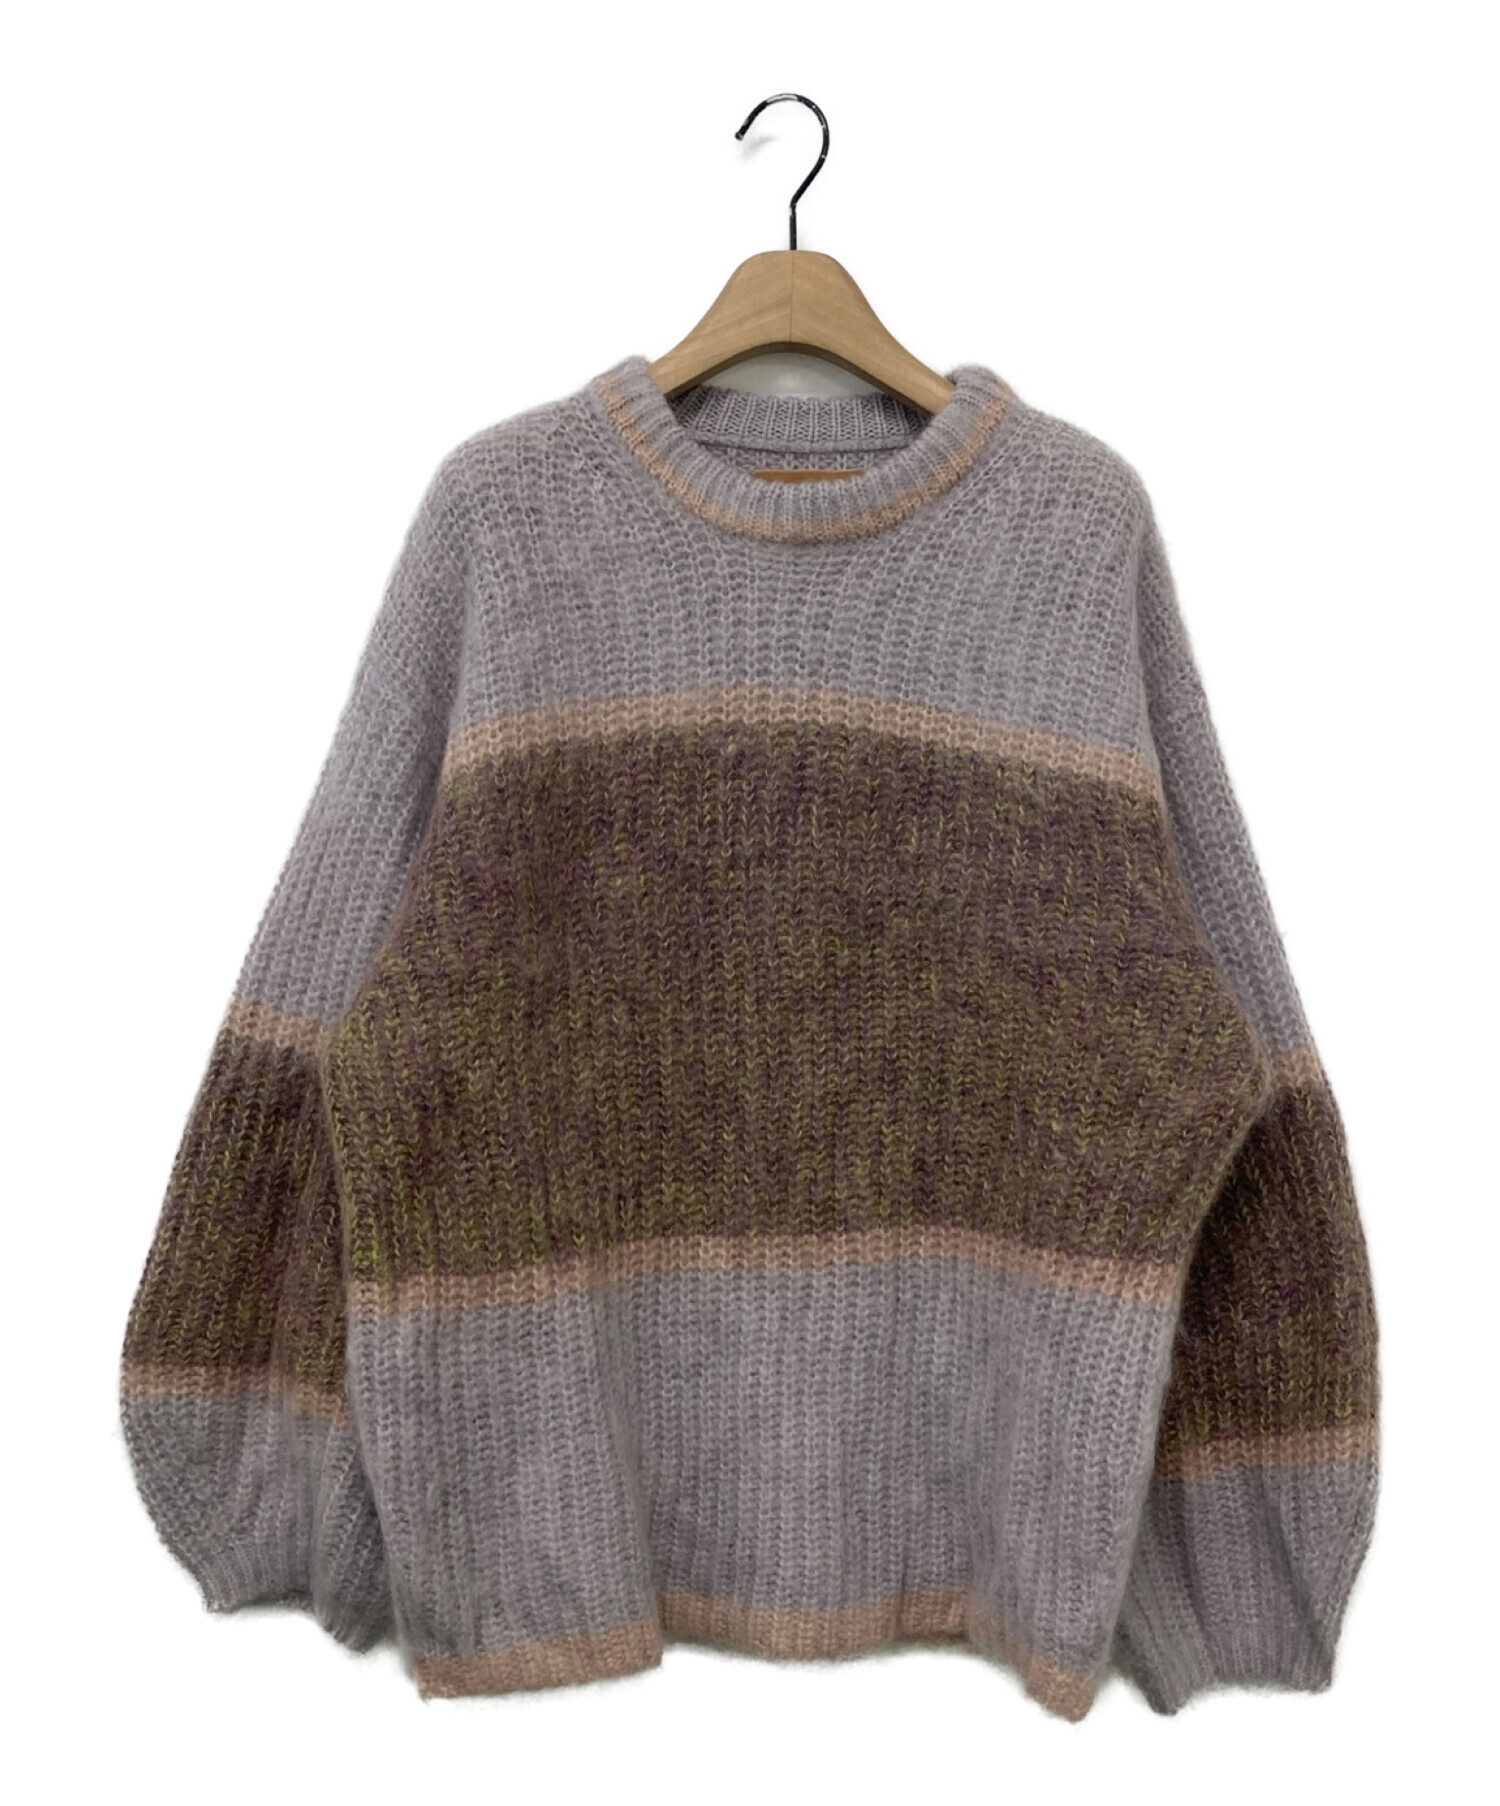 Ameri VINTAGE (アメリヴィンテージ) UND MOHAIR BICOLOR LOOSE KNIT ラベンダー サイズ:-